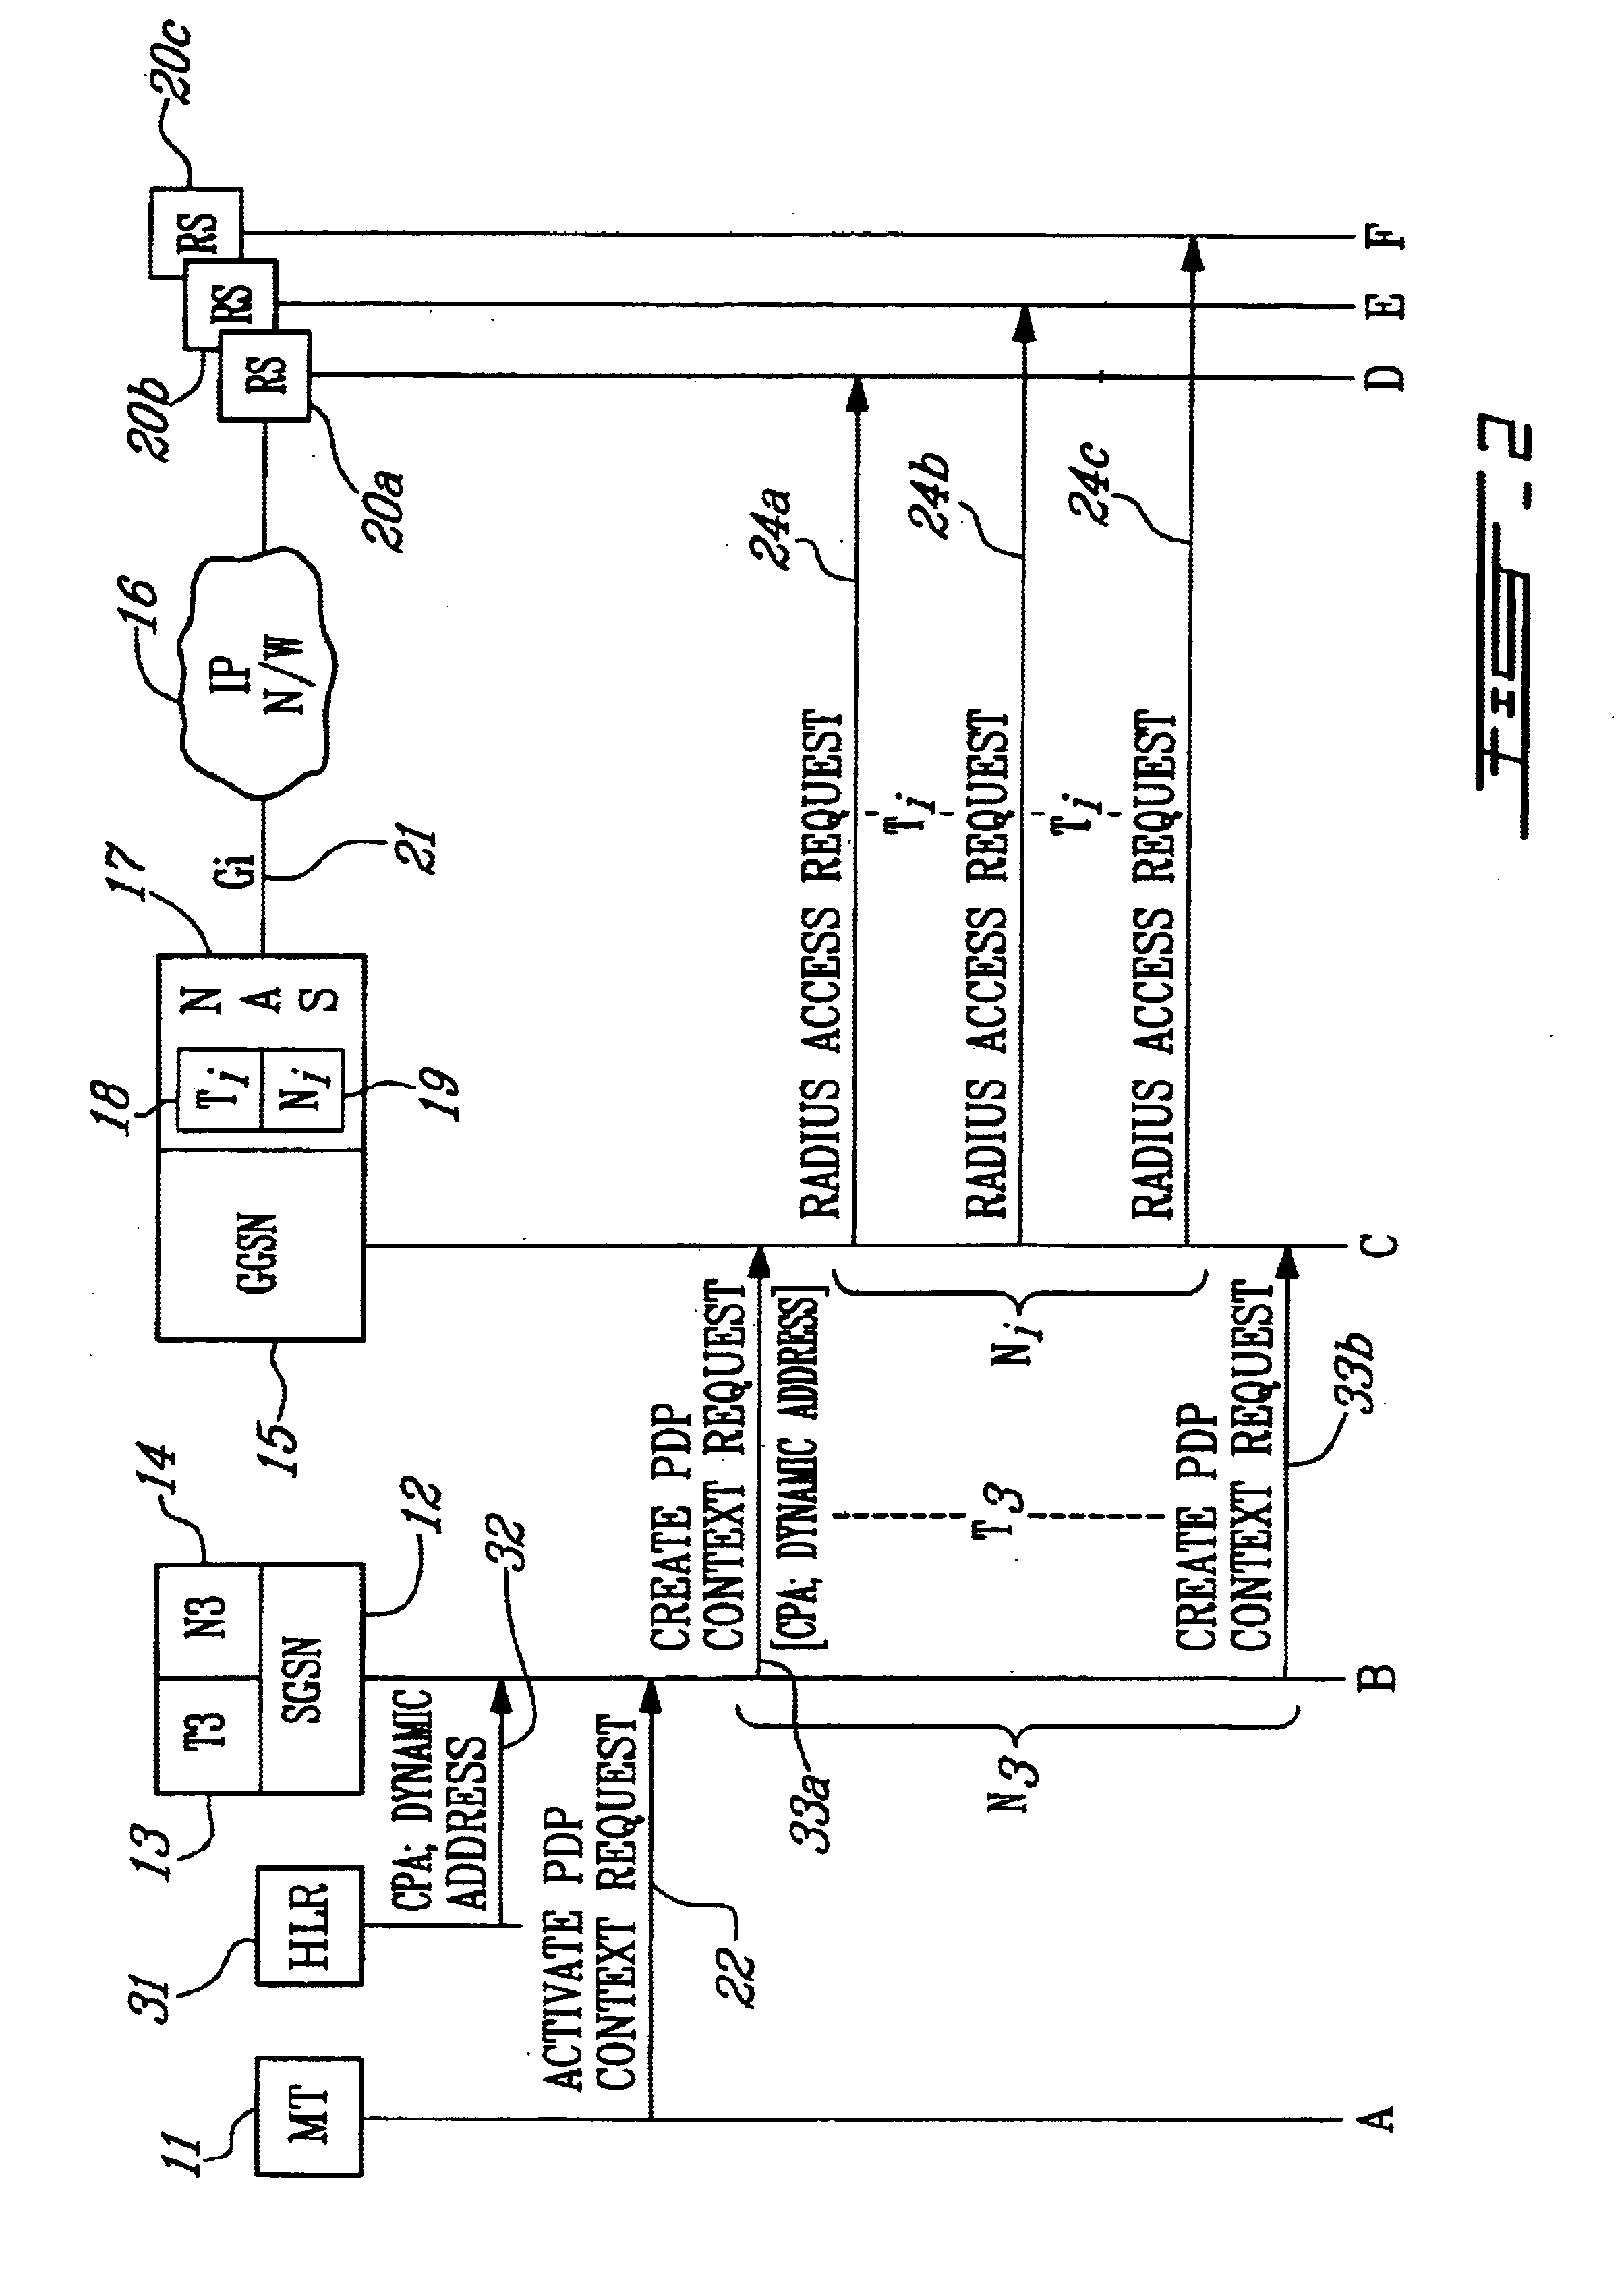 Dynamic IP address allocation system and method